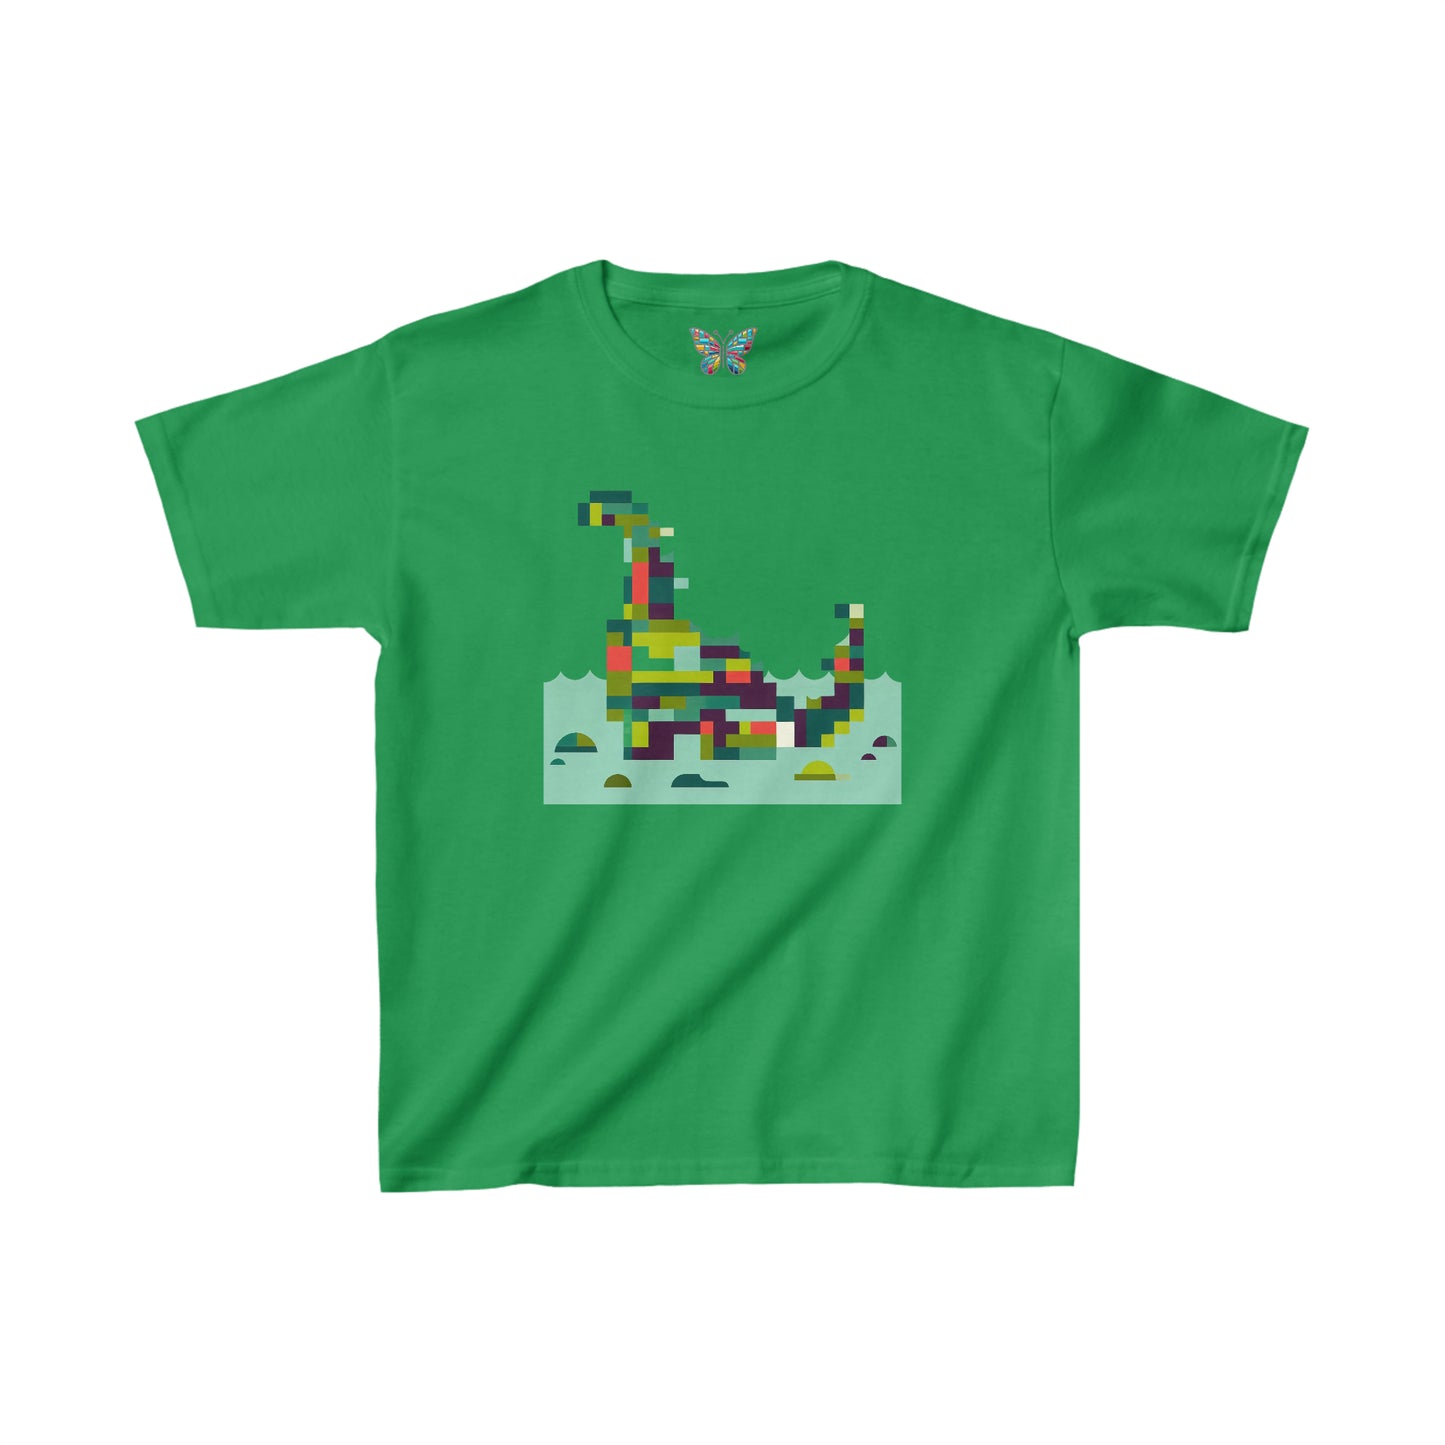 Loch Ness Monster Exquisplority - Youth - Snazzle Tee